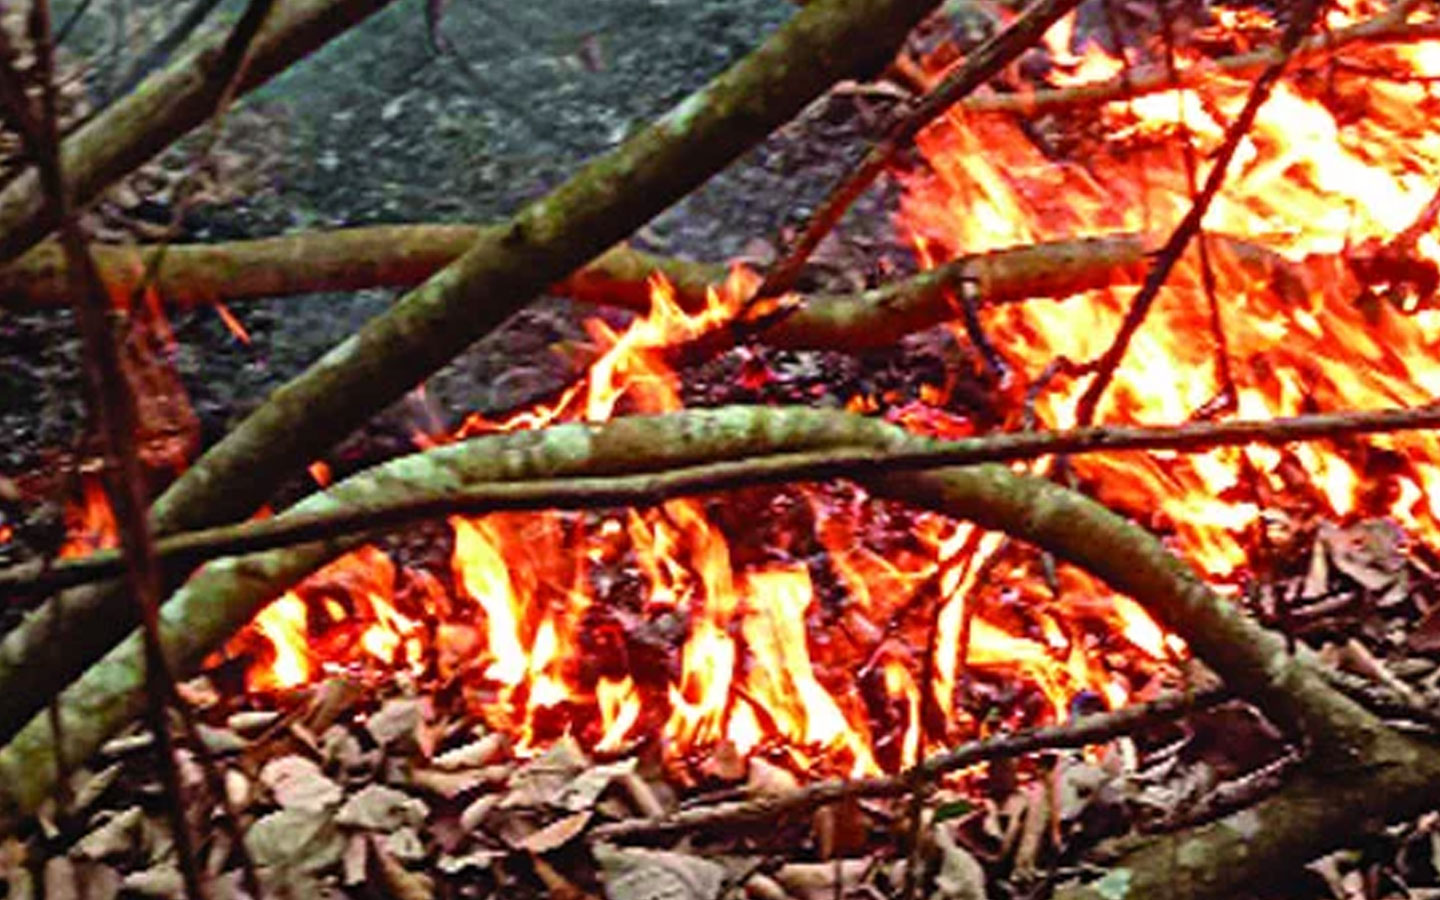 Fire at Sunderbans on the side of Bangaldesh, army tries hard to arrest fire